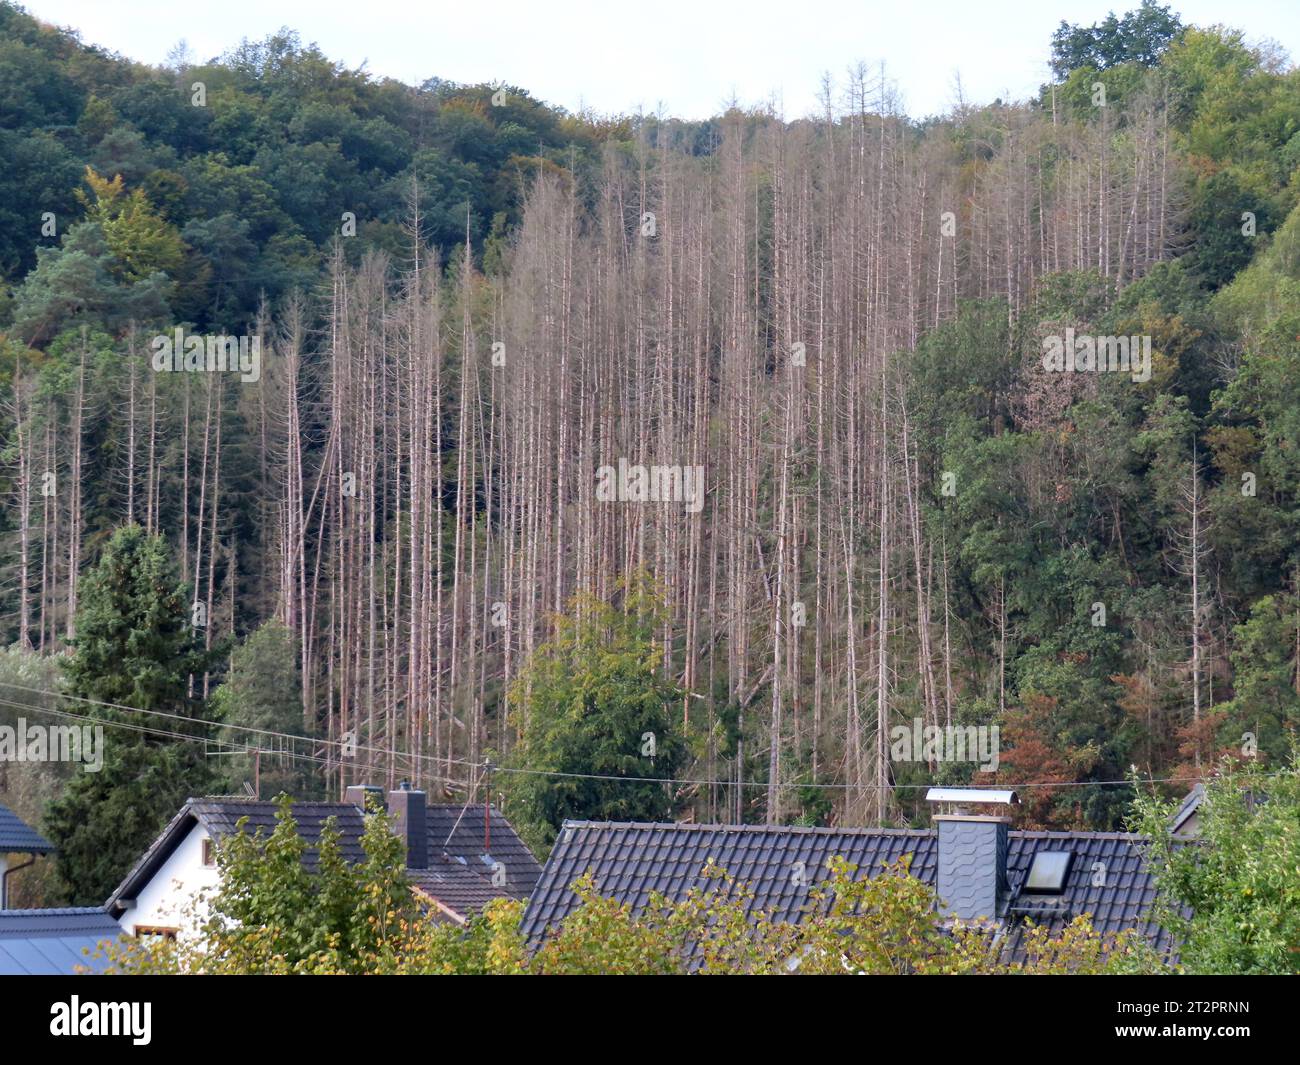 Blick auf abgestorbene Baeume am Ufer der Sieg bei Dattenfeld Dattenfeld im Schatten toter Baeume *** View of dead trees on the bank of the river Sieg near Dattenfeld Dattenfeld in the shadow of dead trees Credit: Imago/Alamy Live News Stock Photo